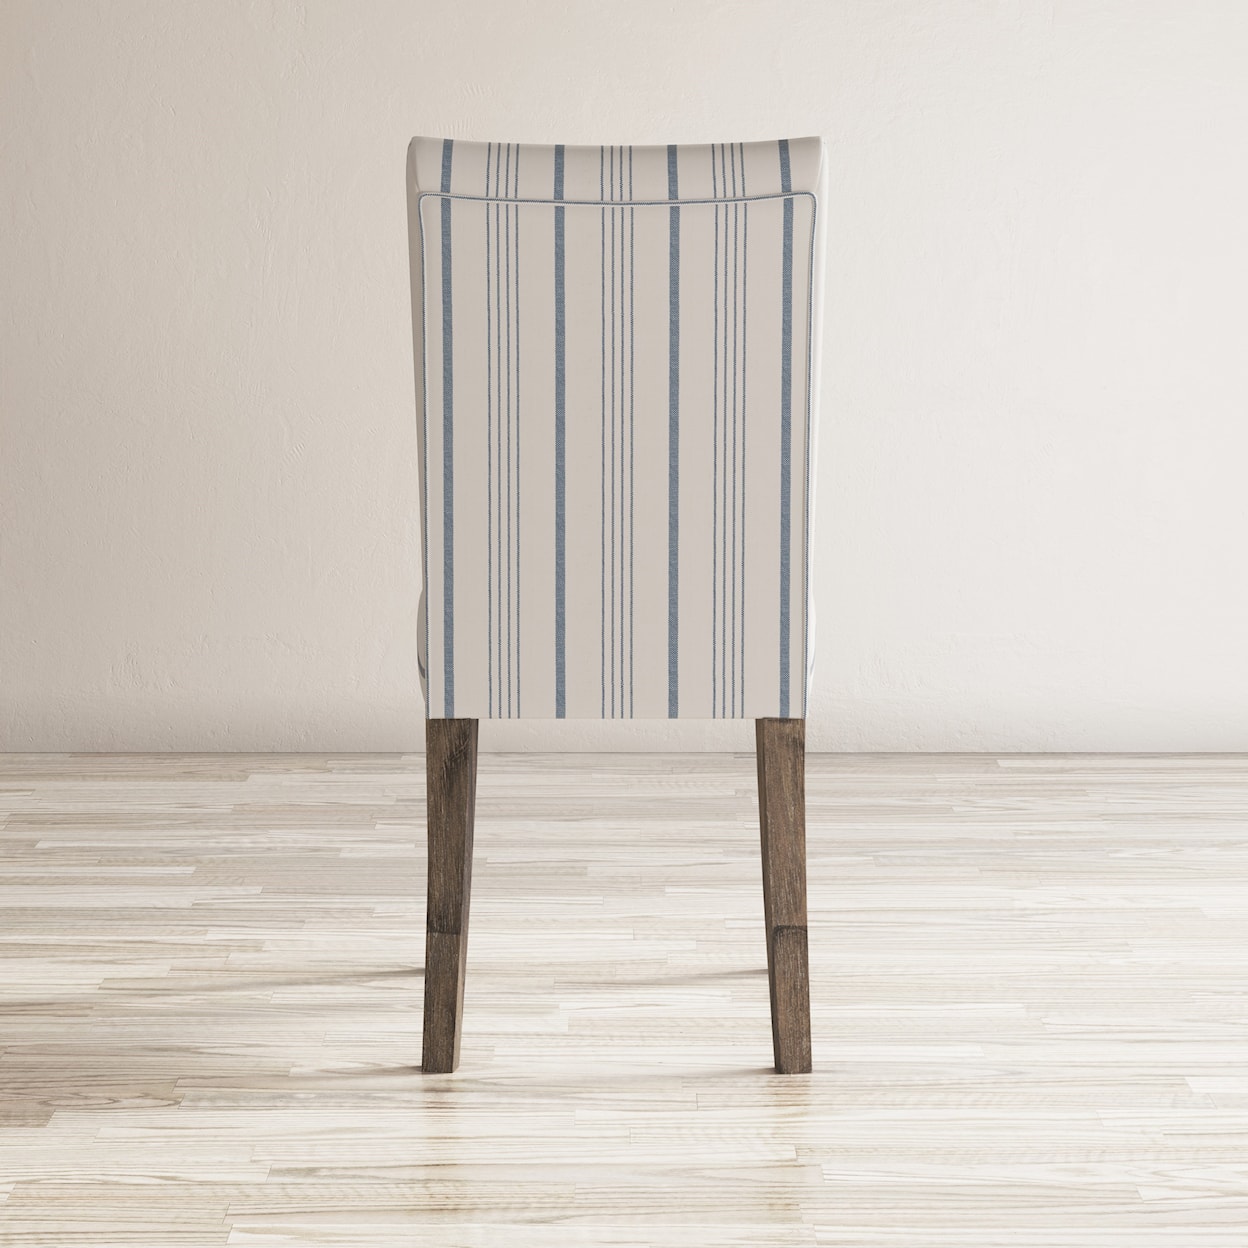 VFM Signature Eastern Tides Uph Dining Chair